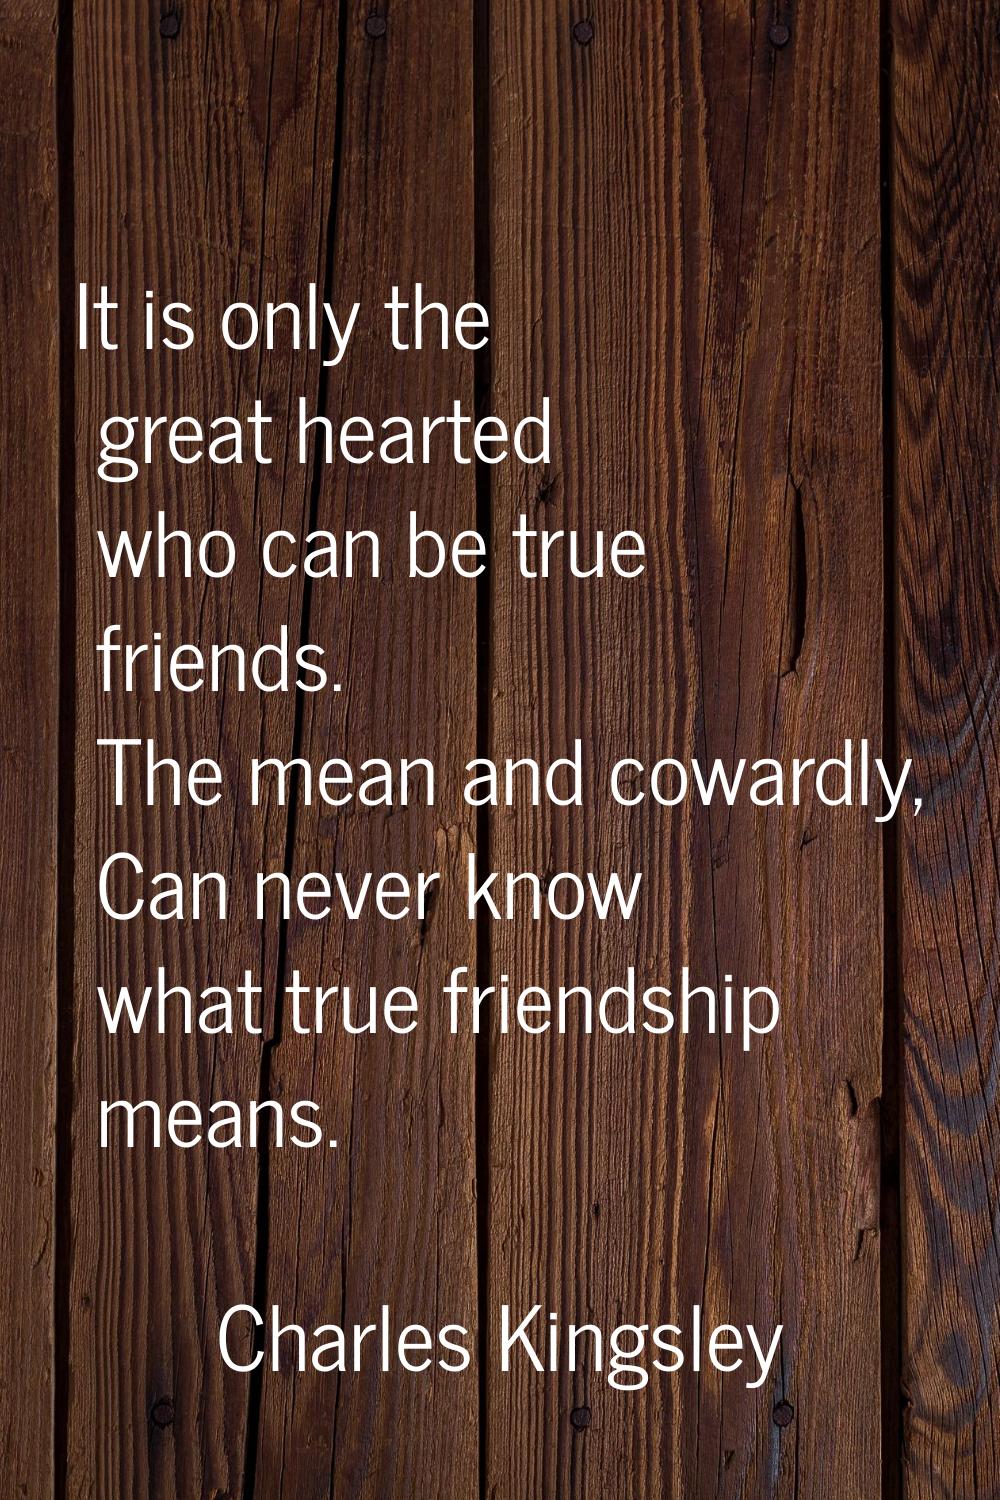 It is only the great hearted who can be true friends. The mean and cowardly, Can never know what tr